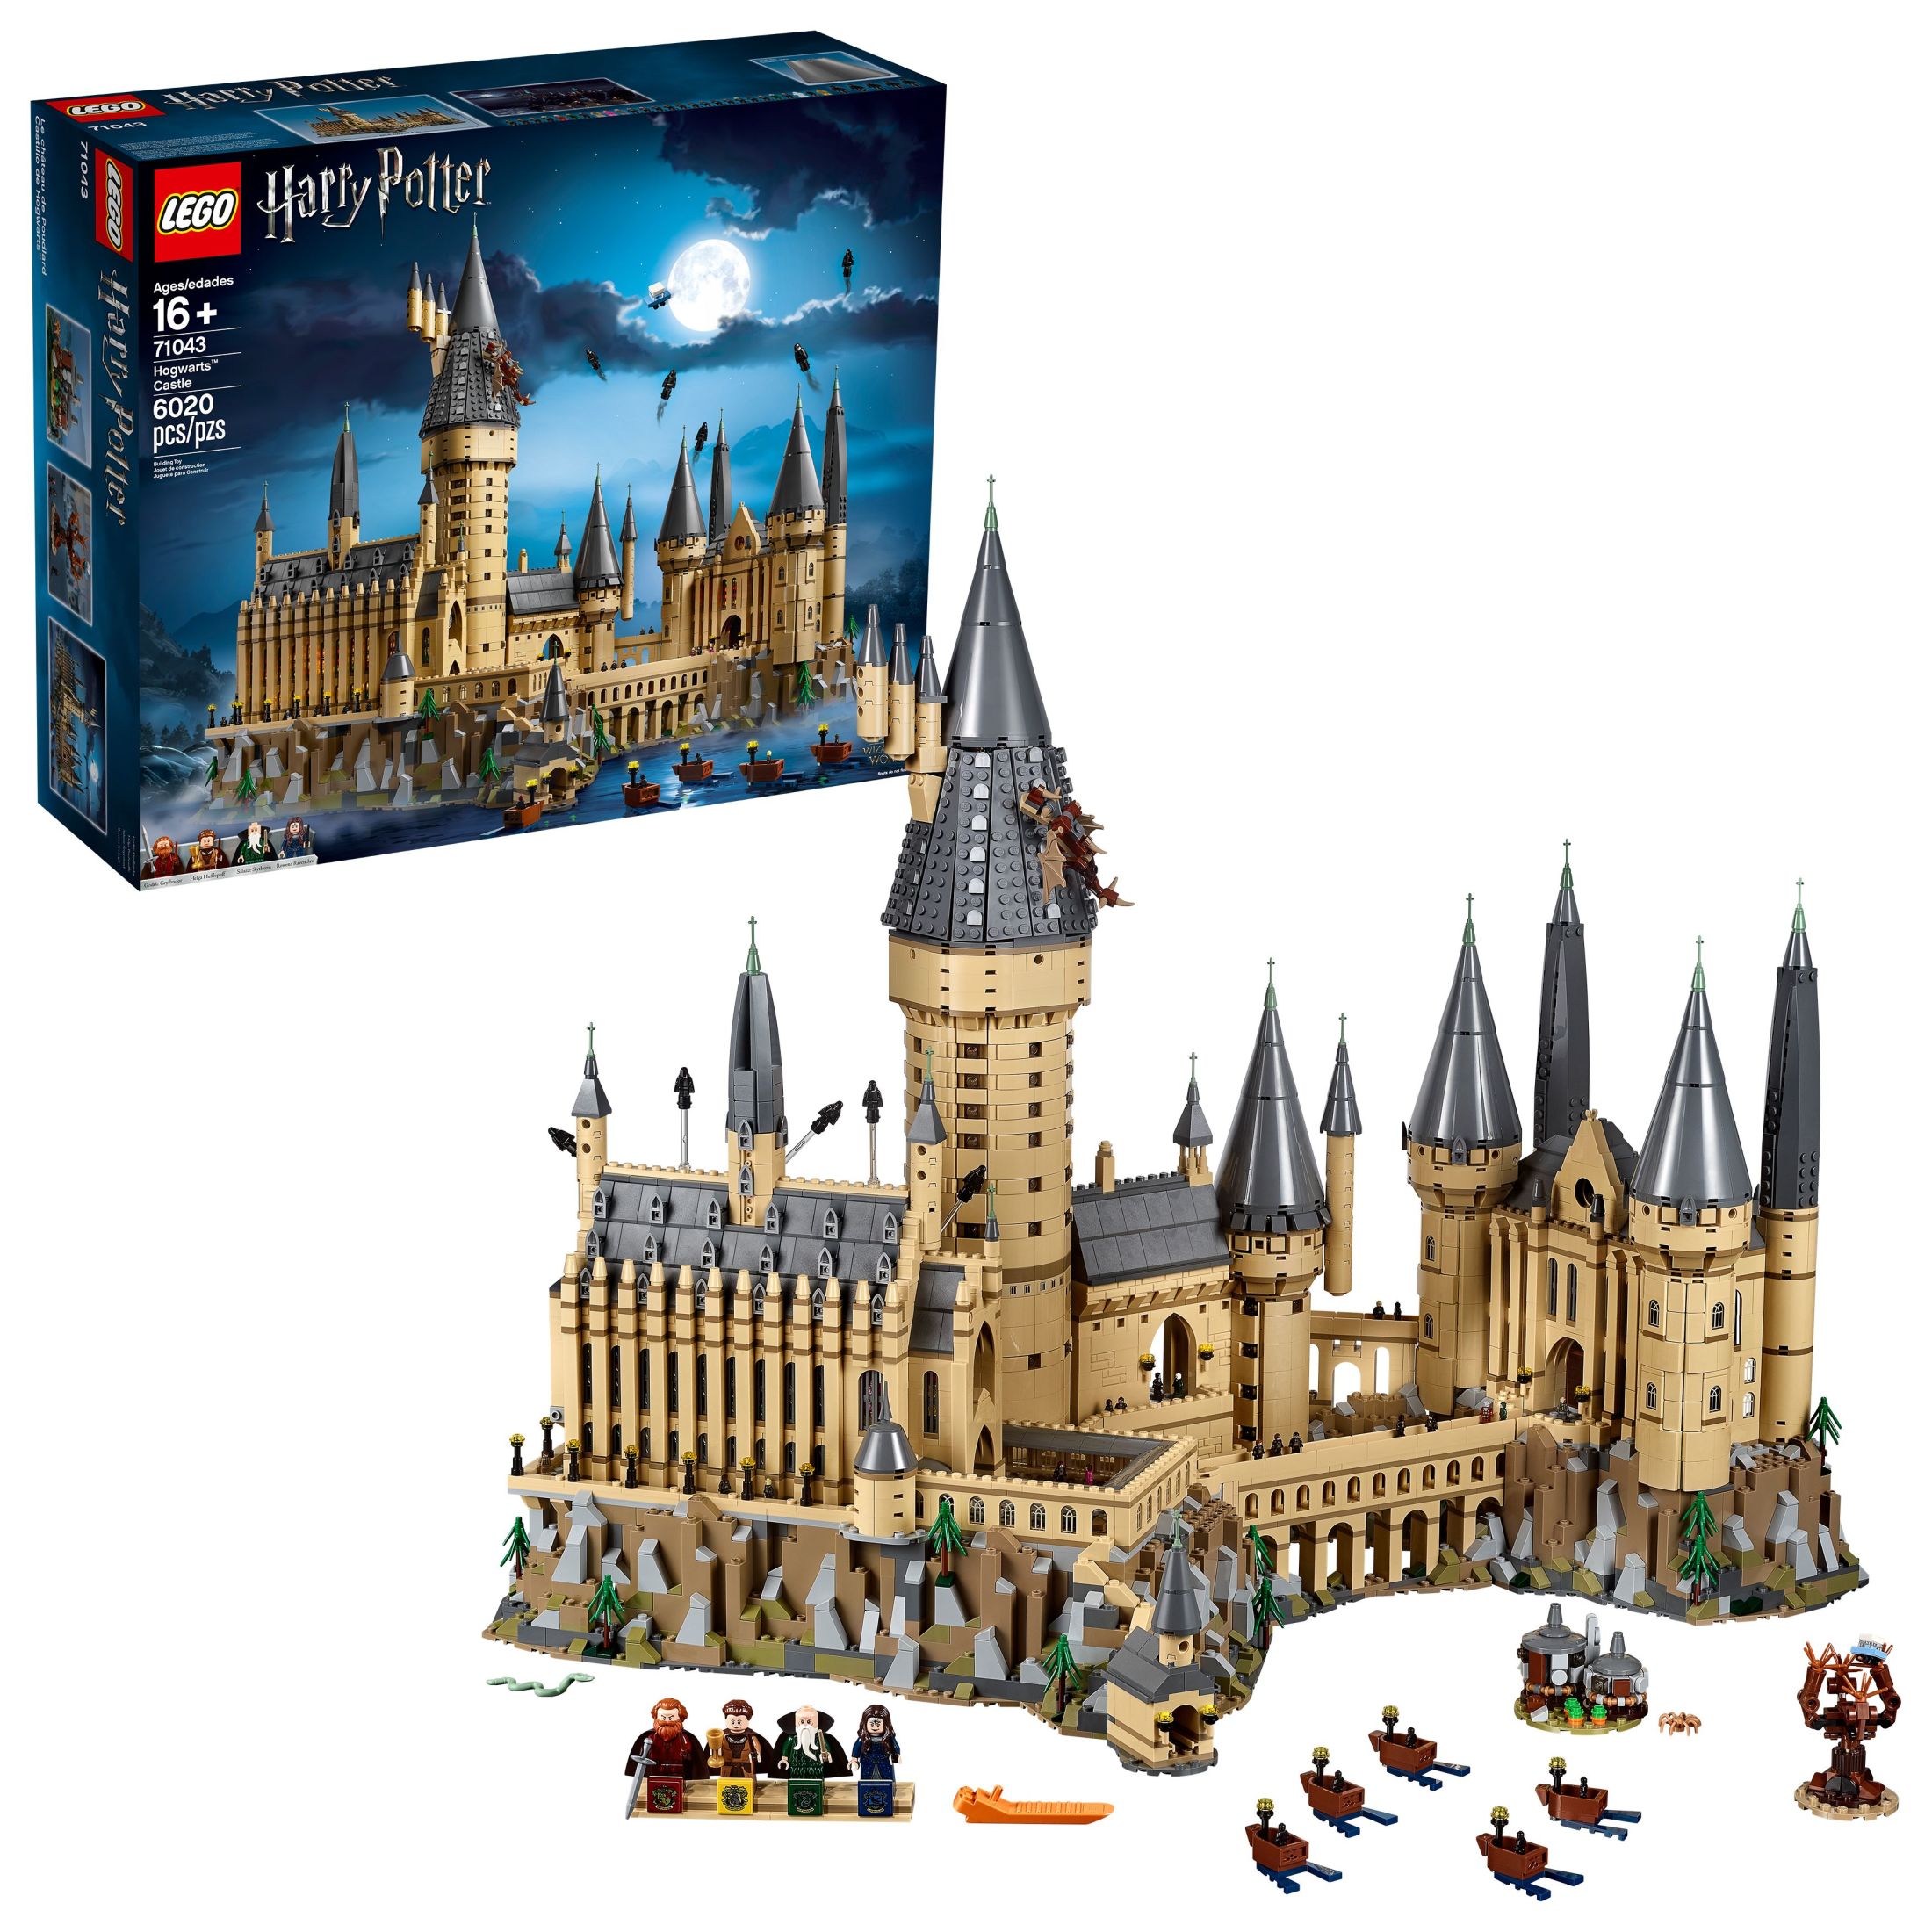 LEGO Harry Potter Hogwarts Castle 71043 Building Set - Model Kit with Minifigures, Featuring Wand, Boats, and Spider Figure, Gryffindor and Hufflepuff Accessories, Collectible for Adults and Teens - image 1 of 8